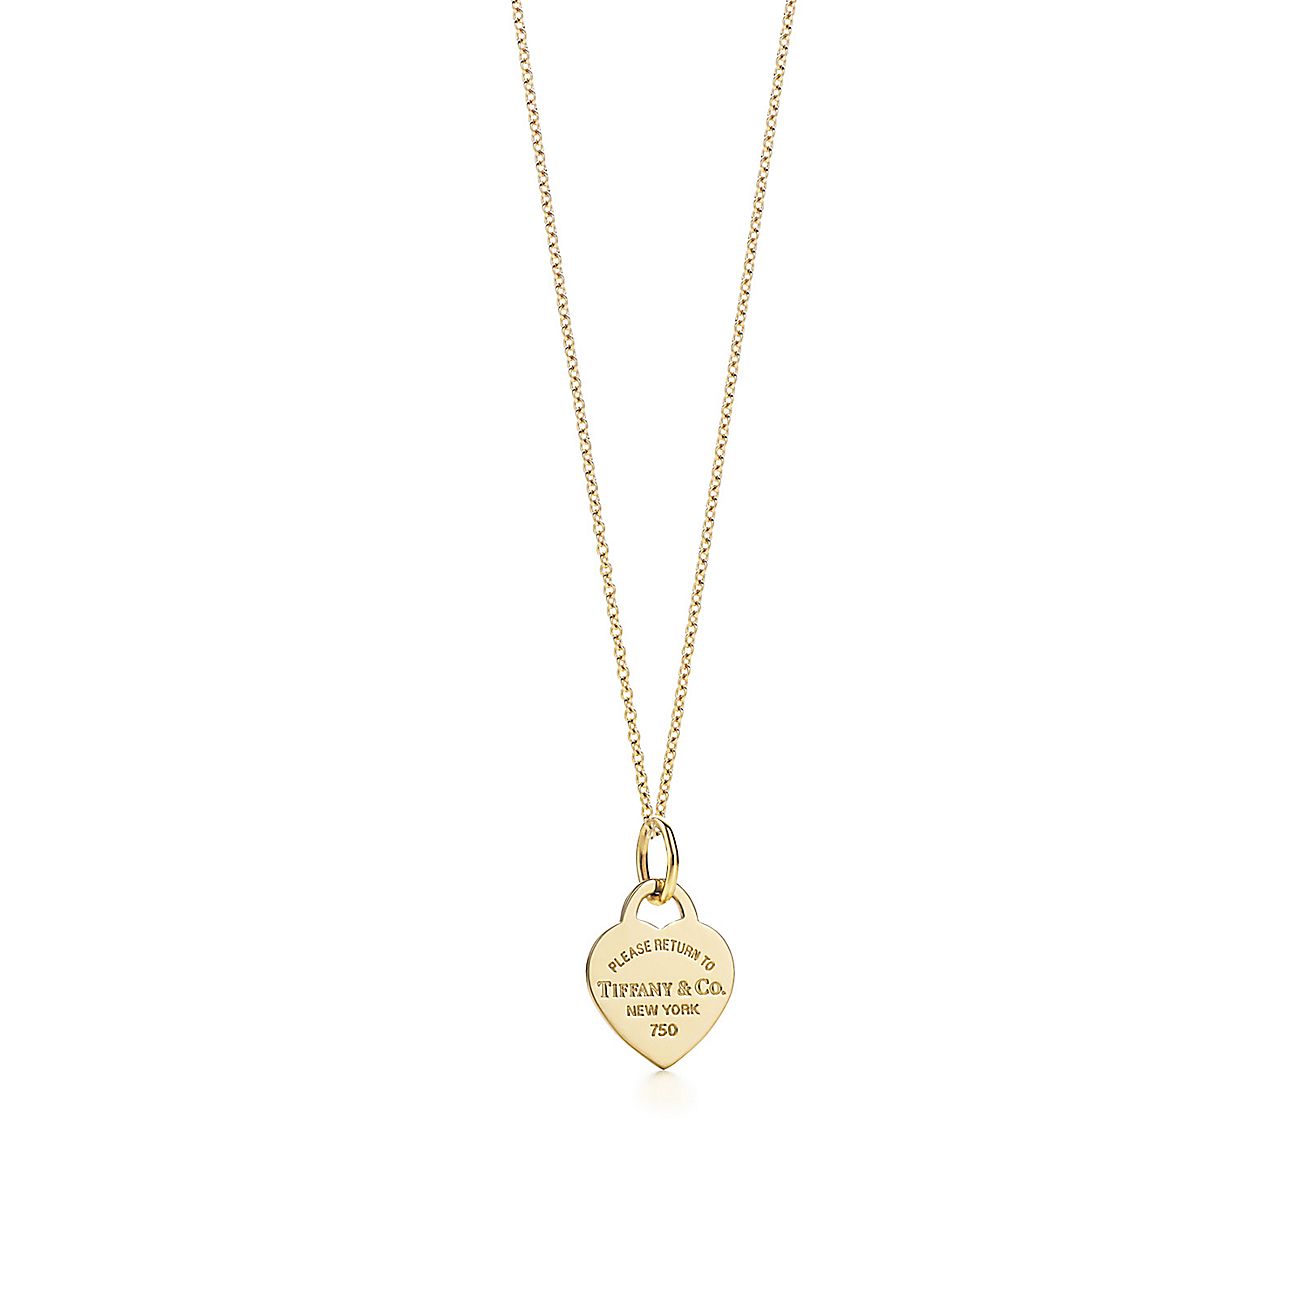 Return to Tiffany™ heart tag charm in 18k gold on a chain. | Tiffany & Co.